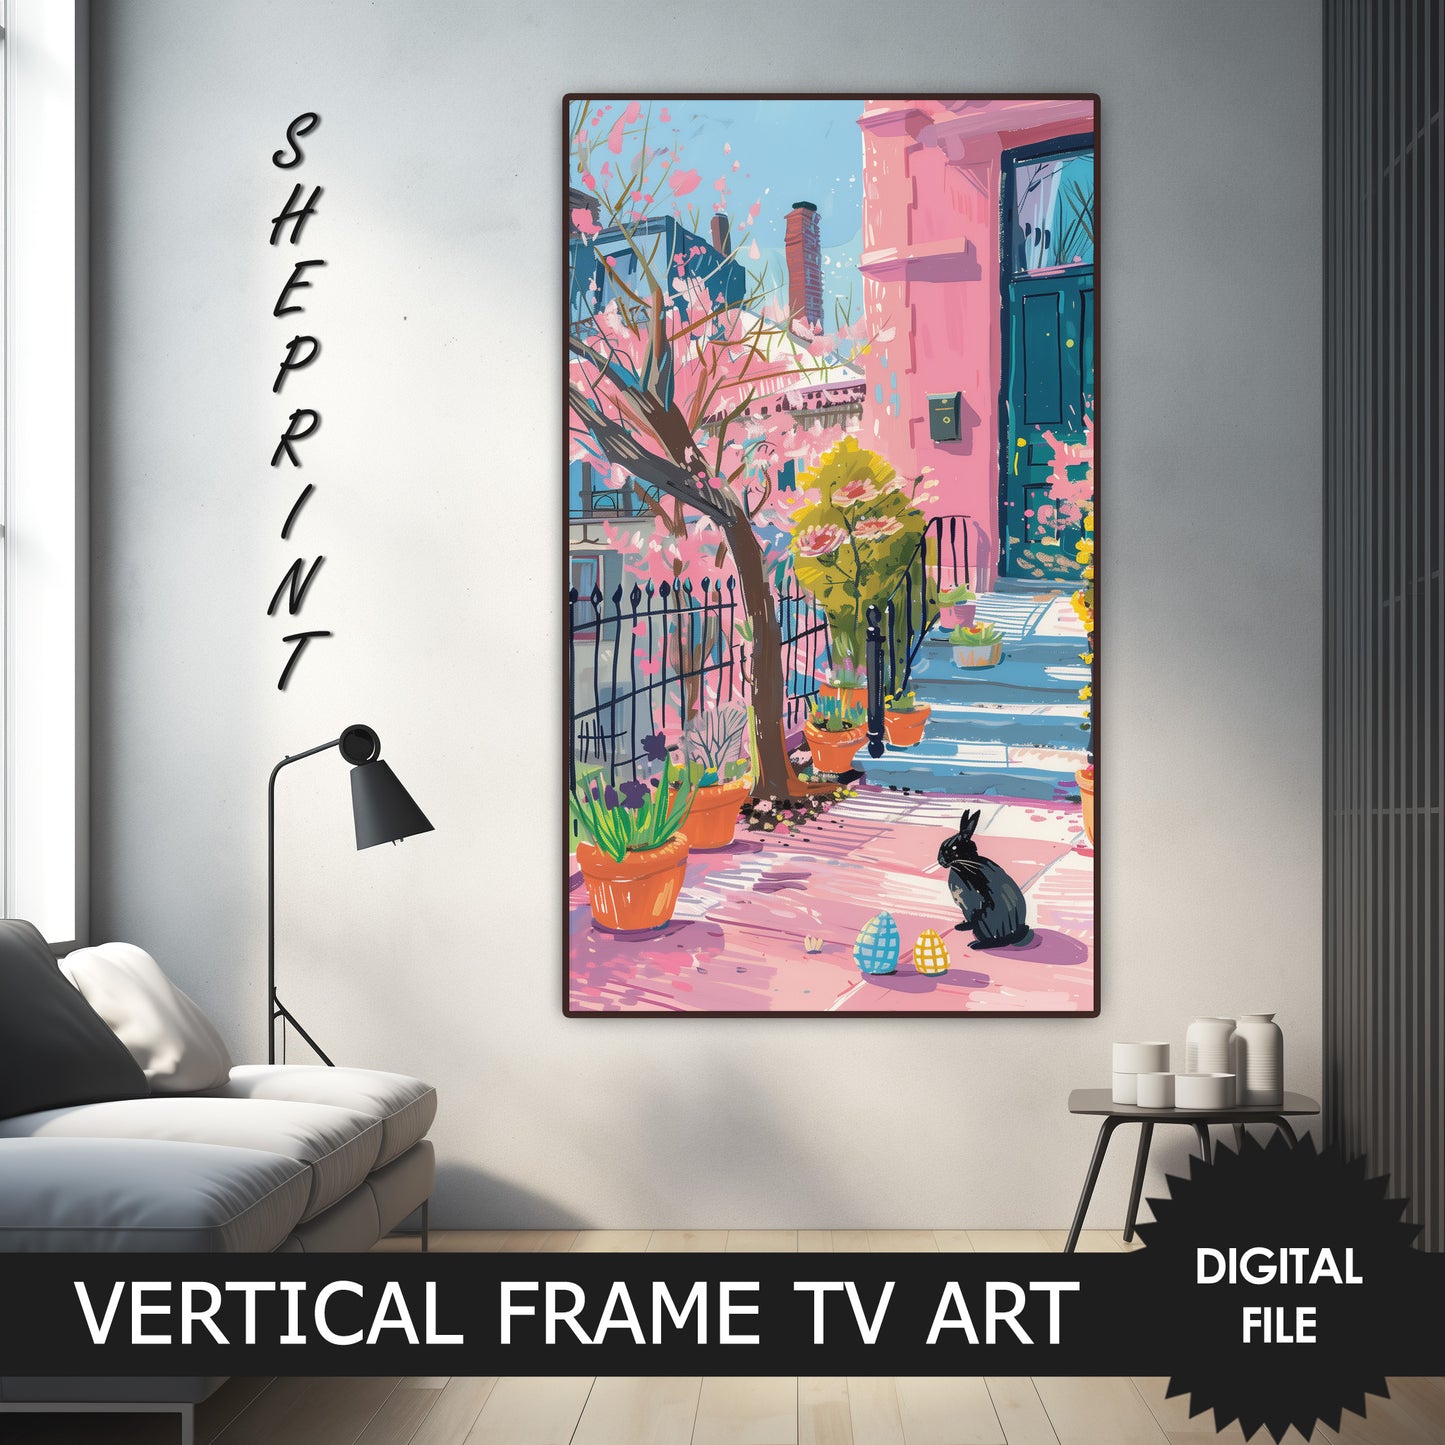 Vertical Frame TV Art, Spring Easter Day Watercolor preview on samsung Frame TV when mounted vertically